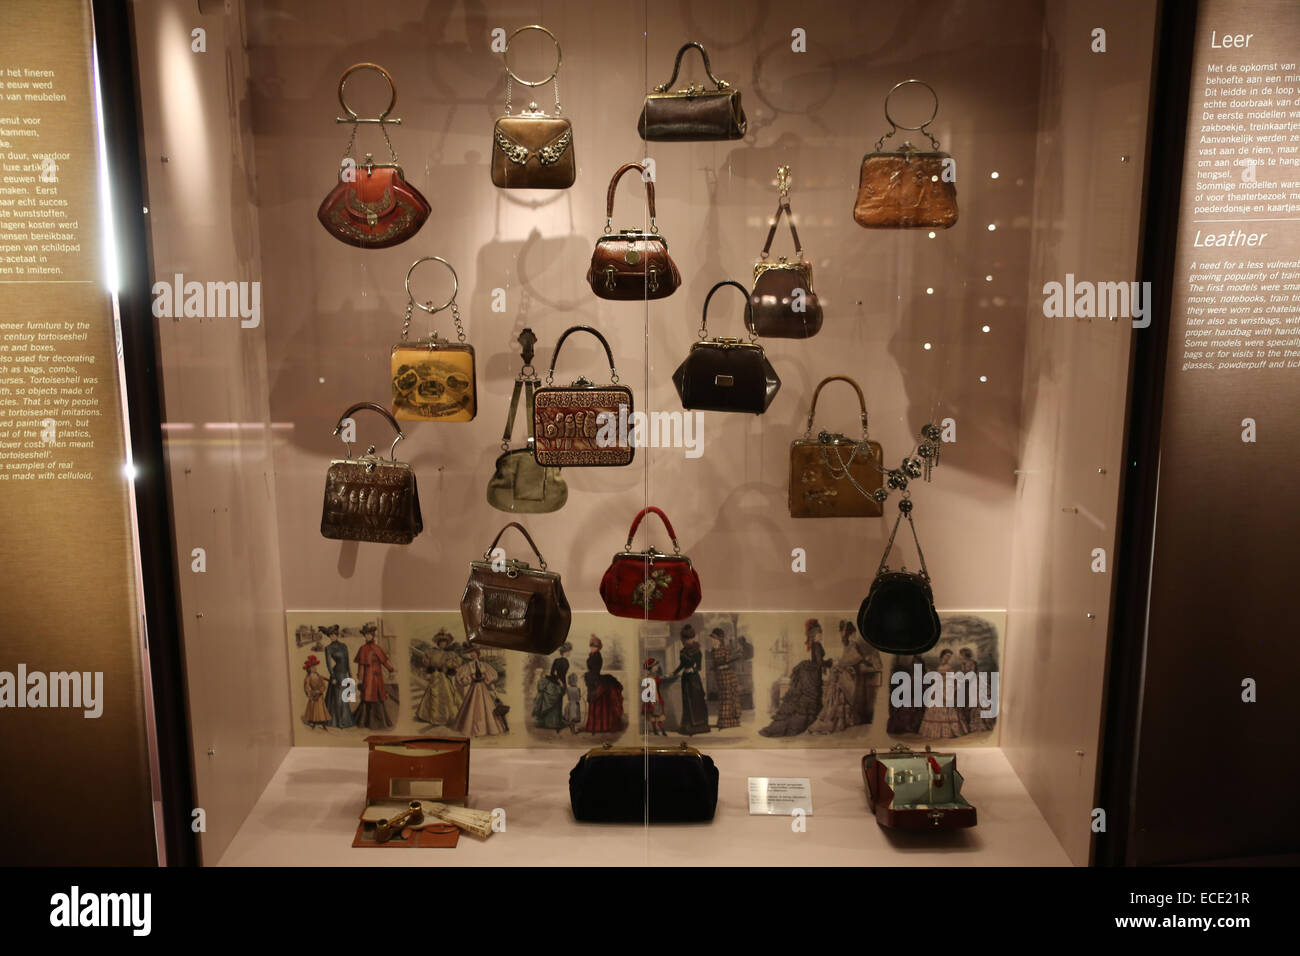 Museum of Bags and Purses, Amsterdam - Craft & Travel